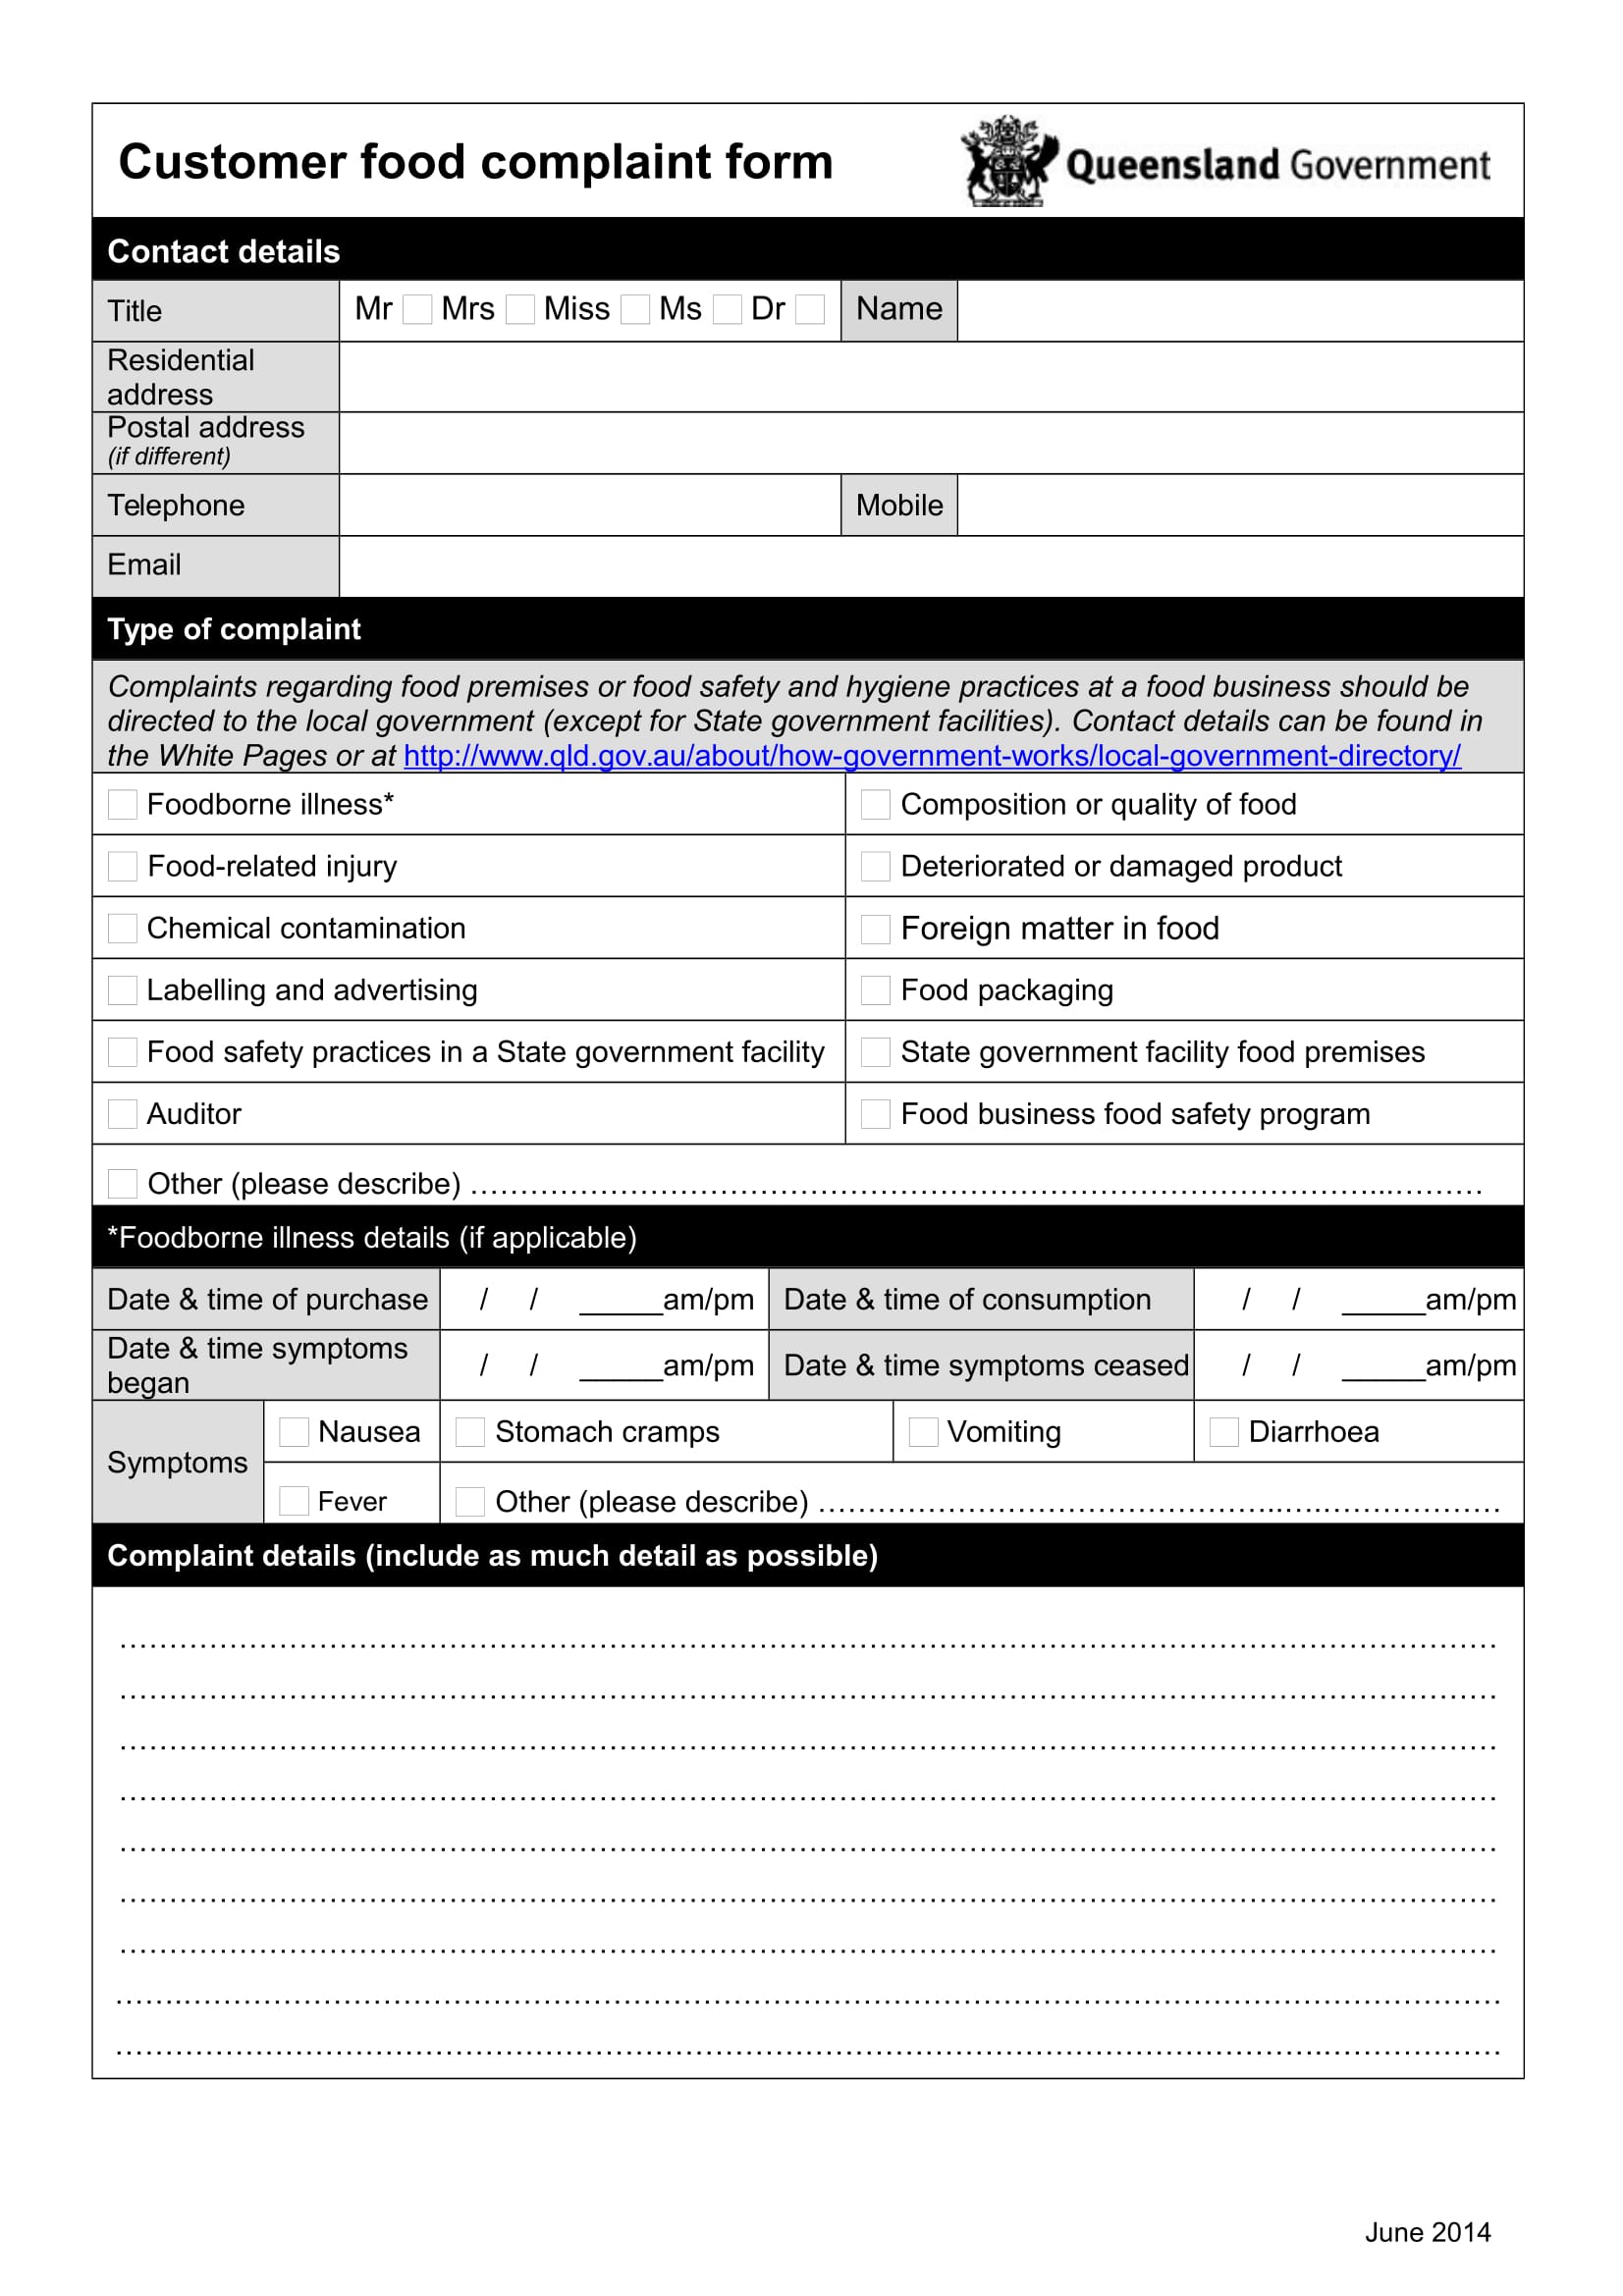 free-4-customer-complaint-forms-in-pdf-ms-word